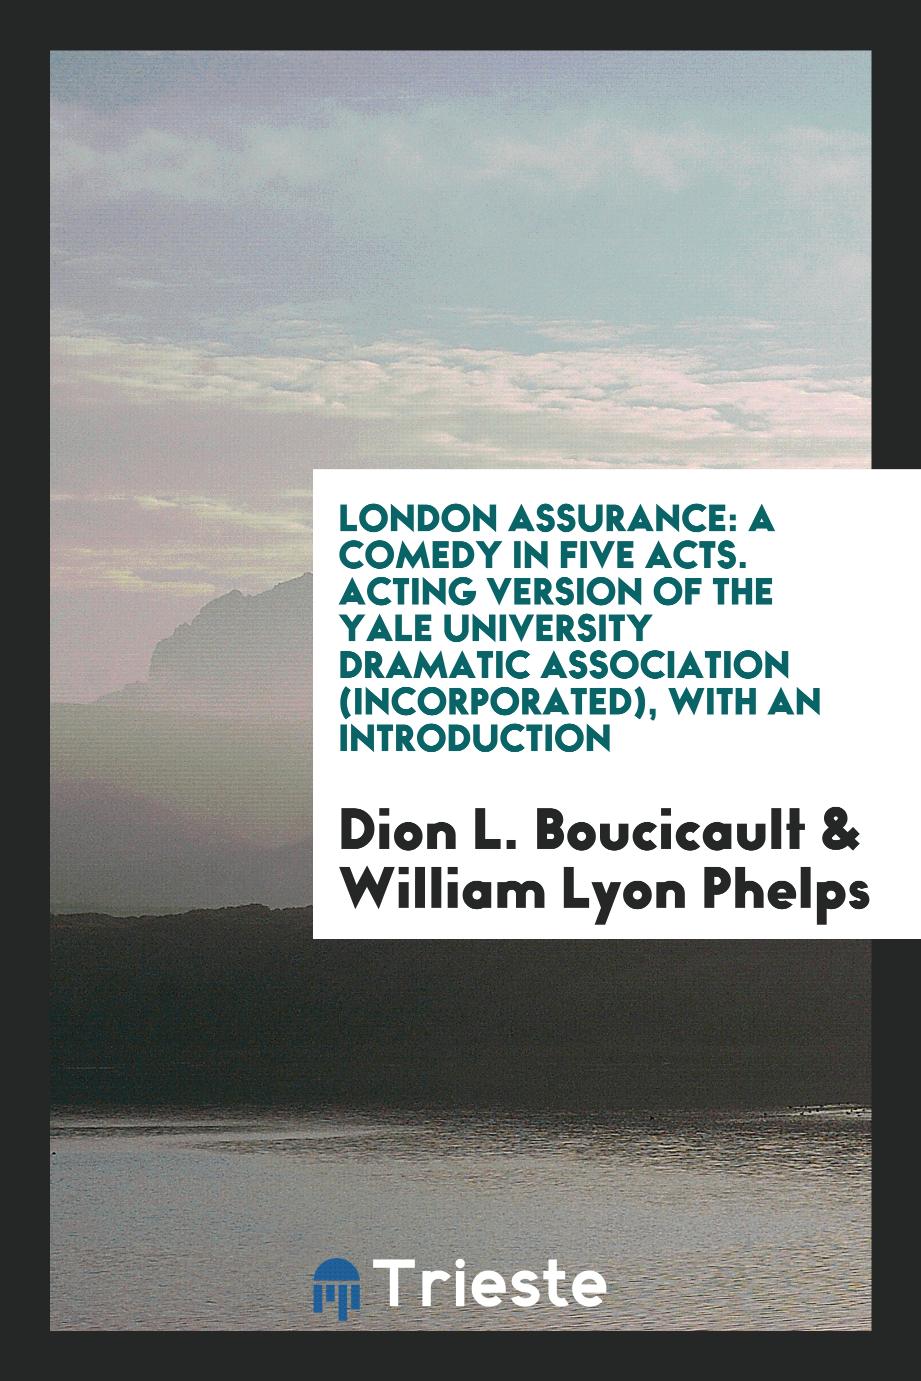 London Assurance: A Comedy in Five Acts. Acting Version of the Yale University Dramatic Association (Incorporated), with an Introduction